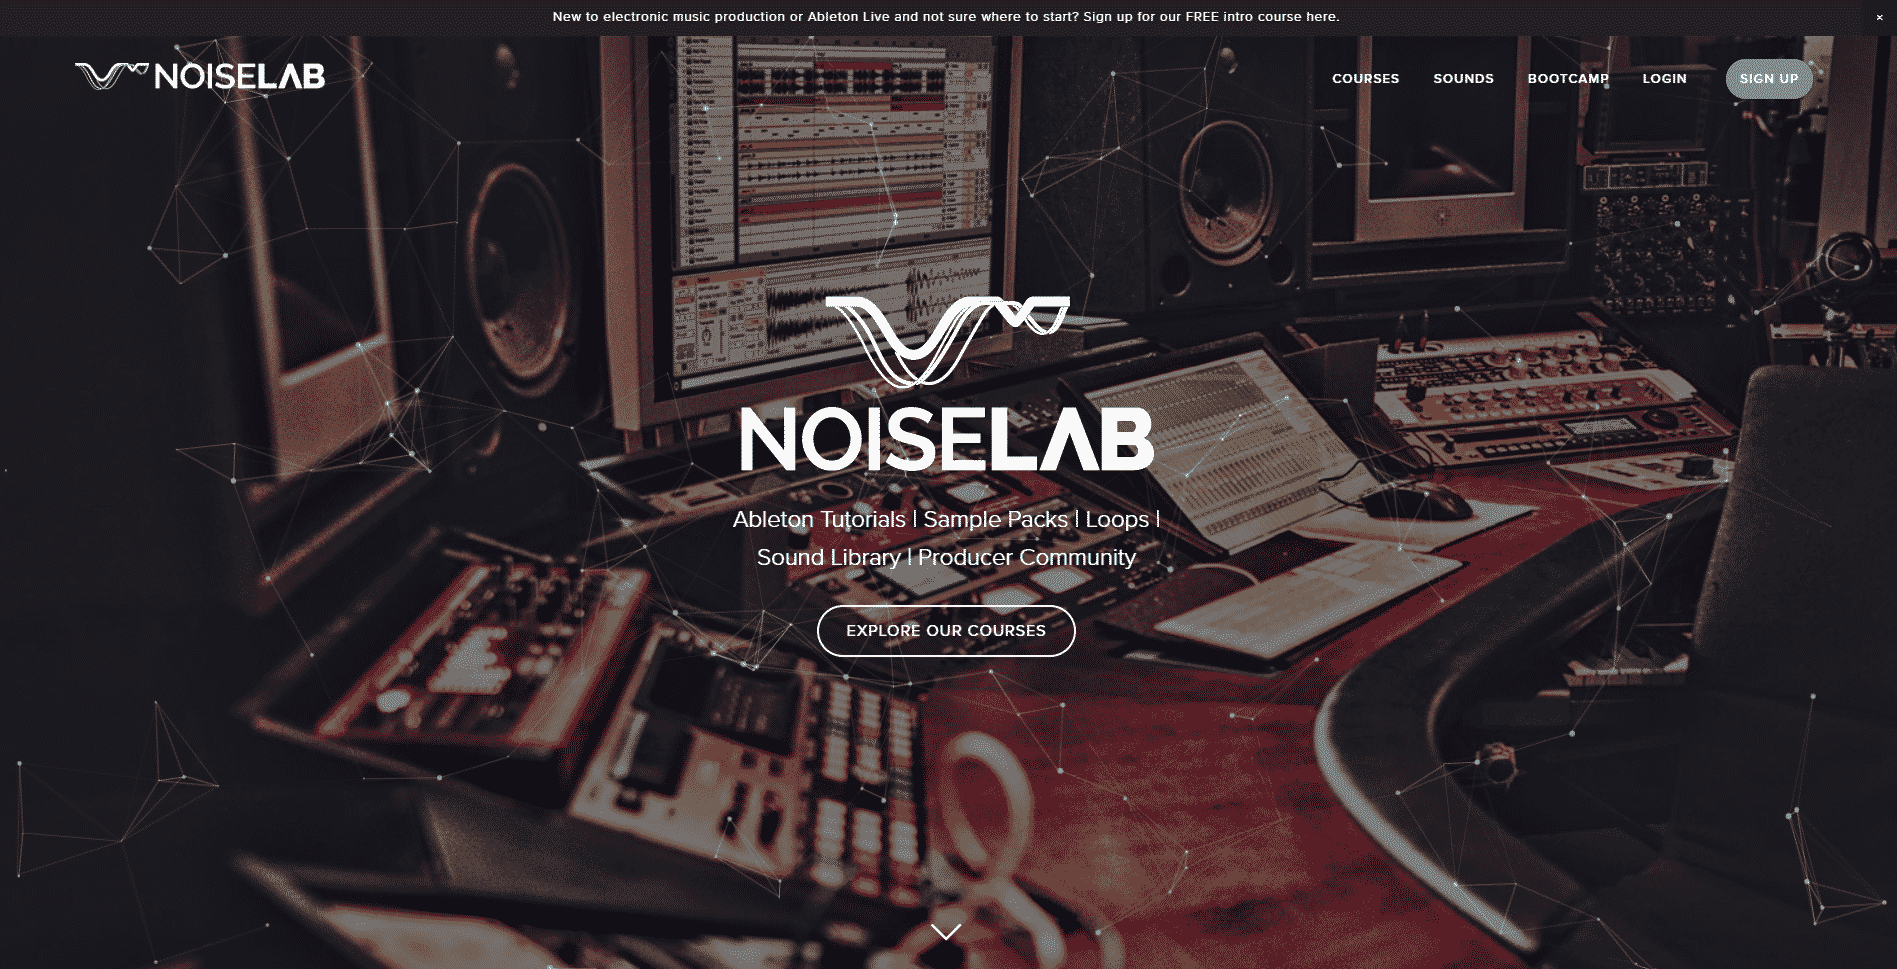 NoiseLab.com Learn Electronic Music Production Lessons Online